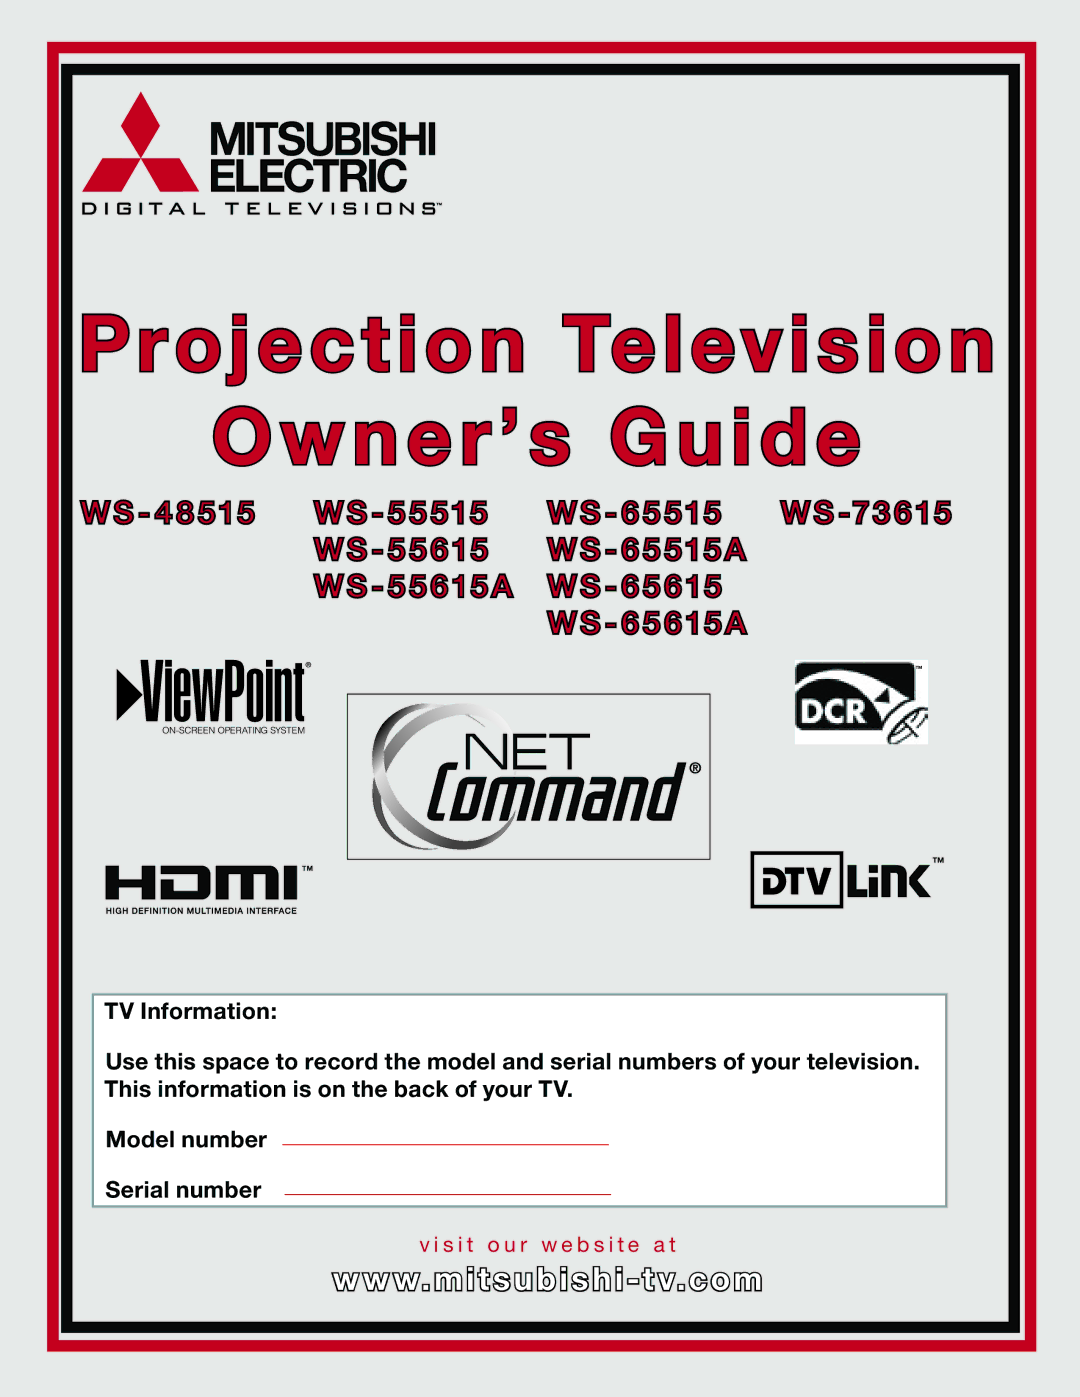 Mitsubishi Electronics WS-65615A, WS-65515A, WS-73615, WS-55615, WS-55515, WS-48515 manual Projection Television Owner’s Guide 